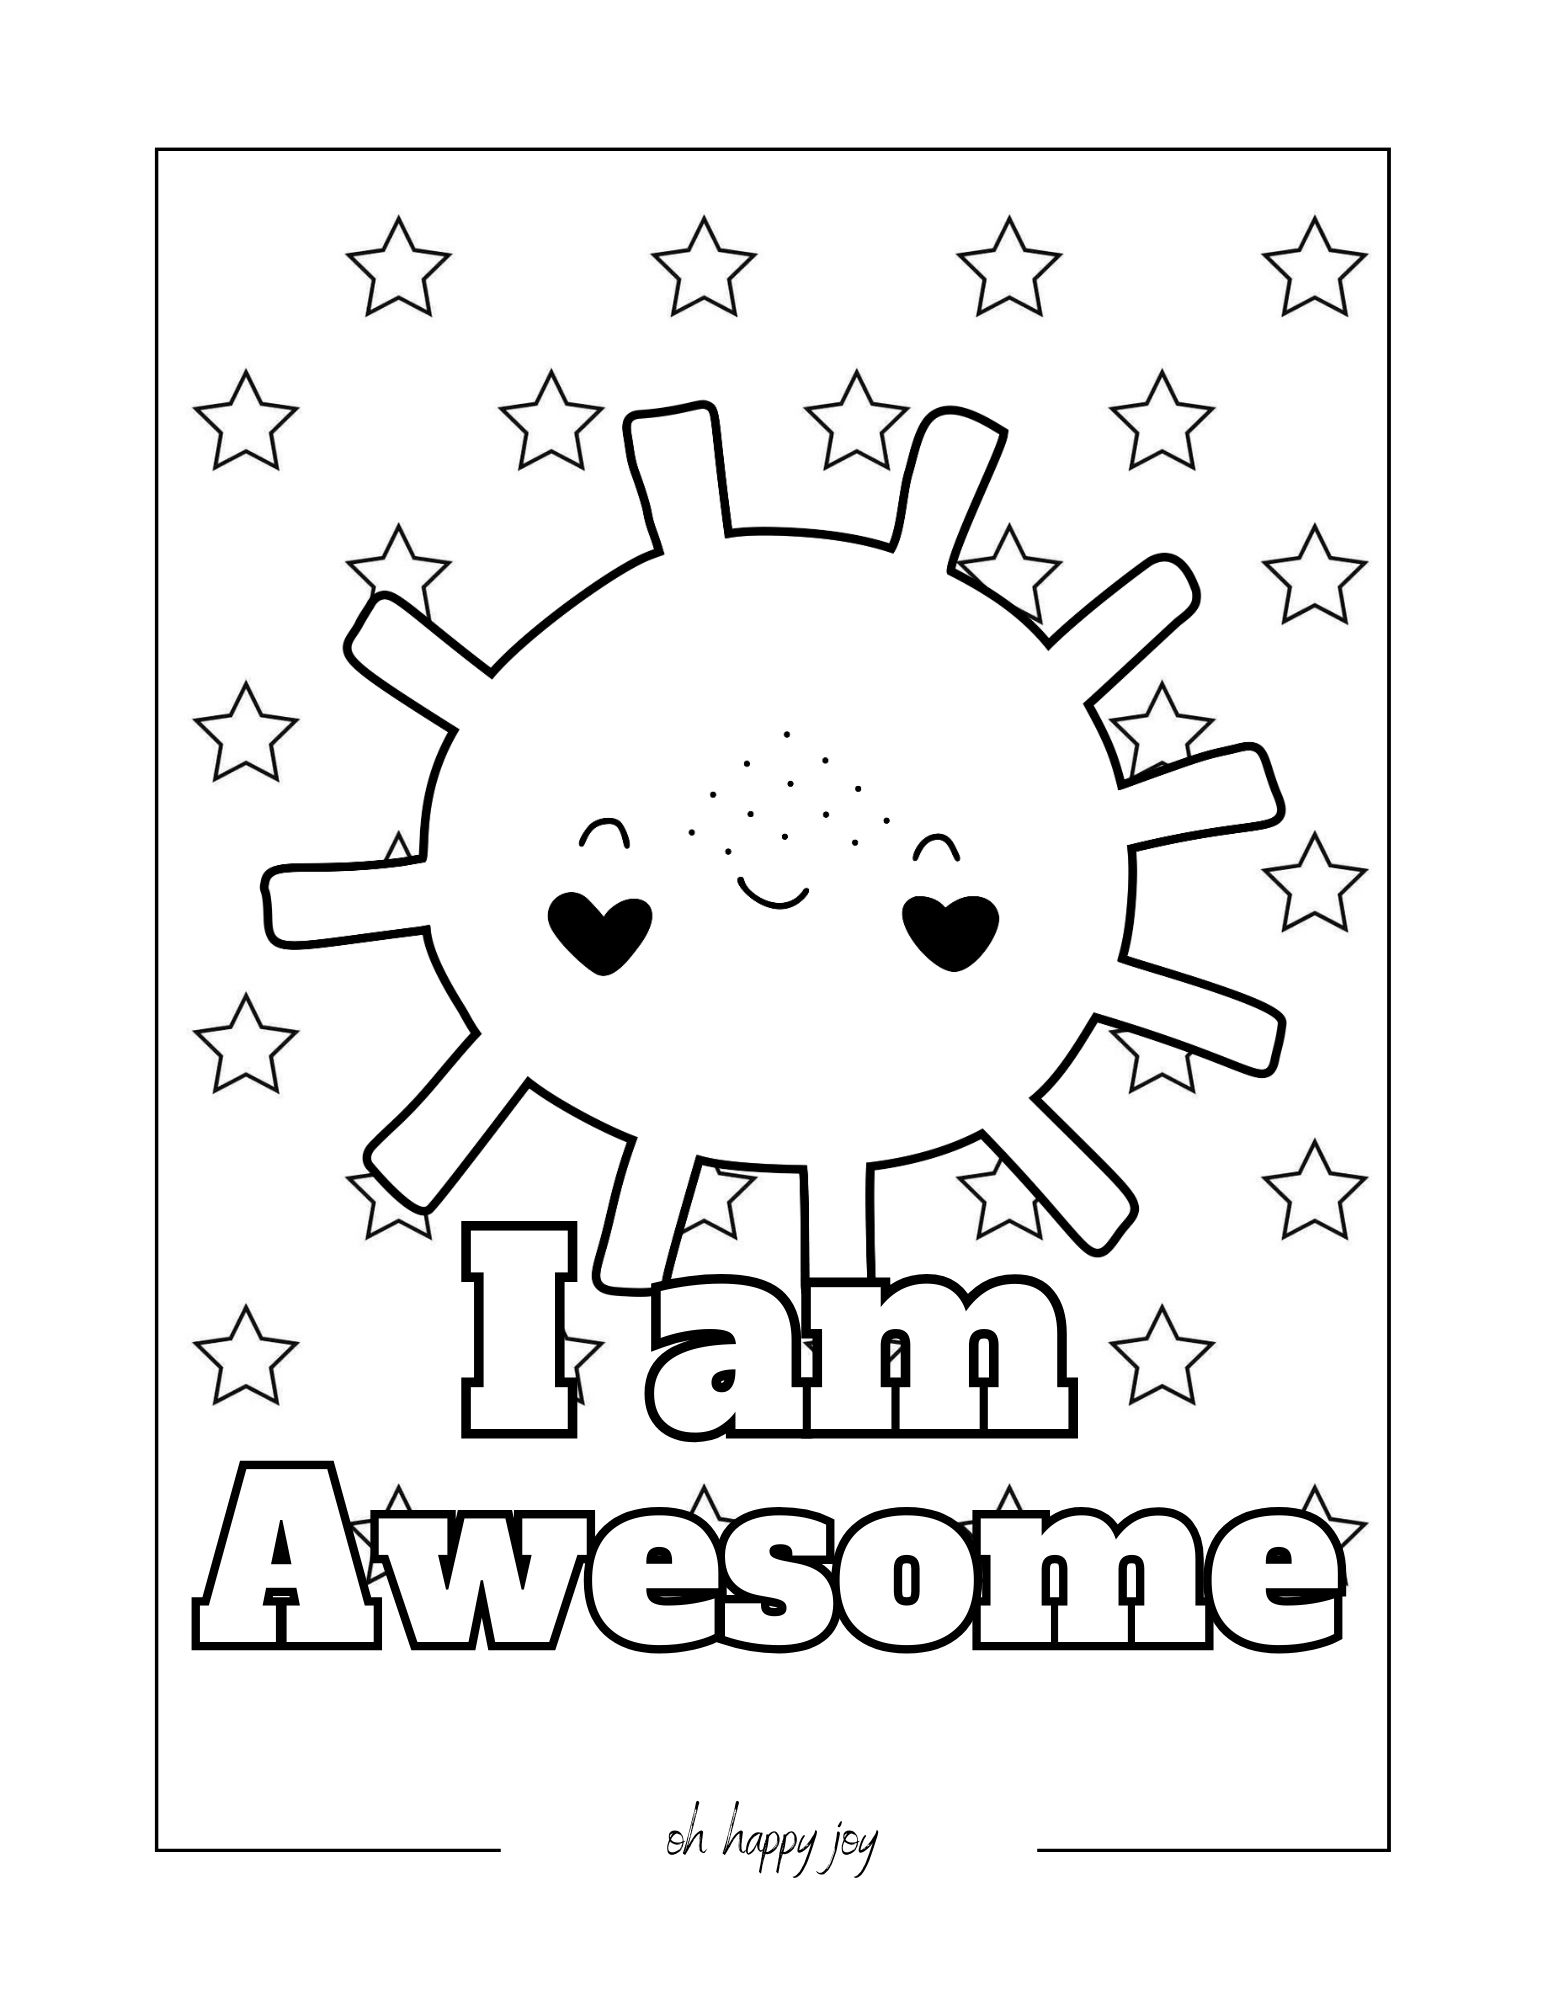 I am awesome affirmation coloring page